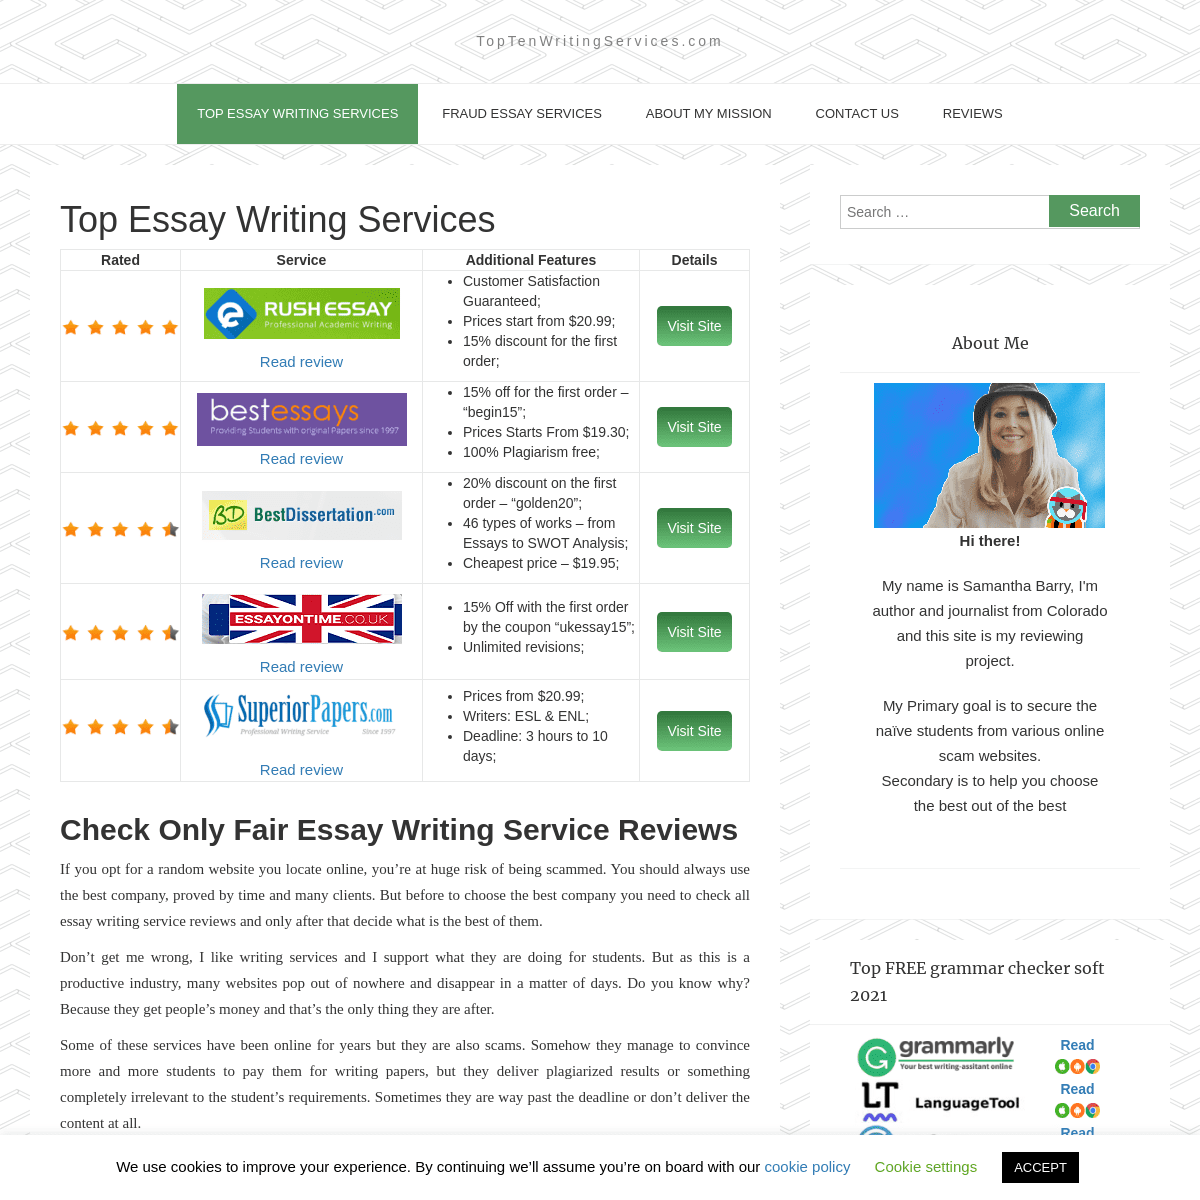 A complete backup of https://toptenwritingservices.com